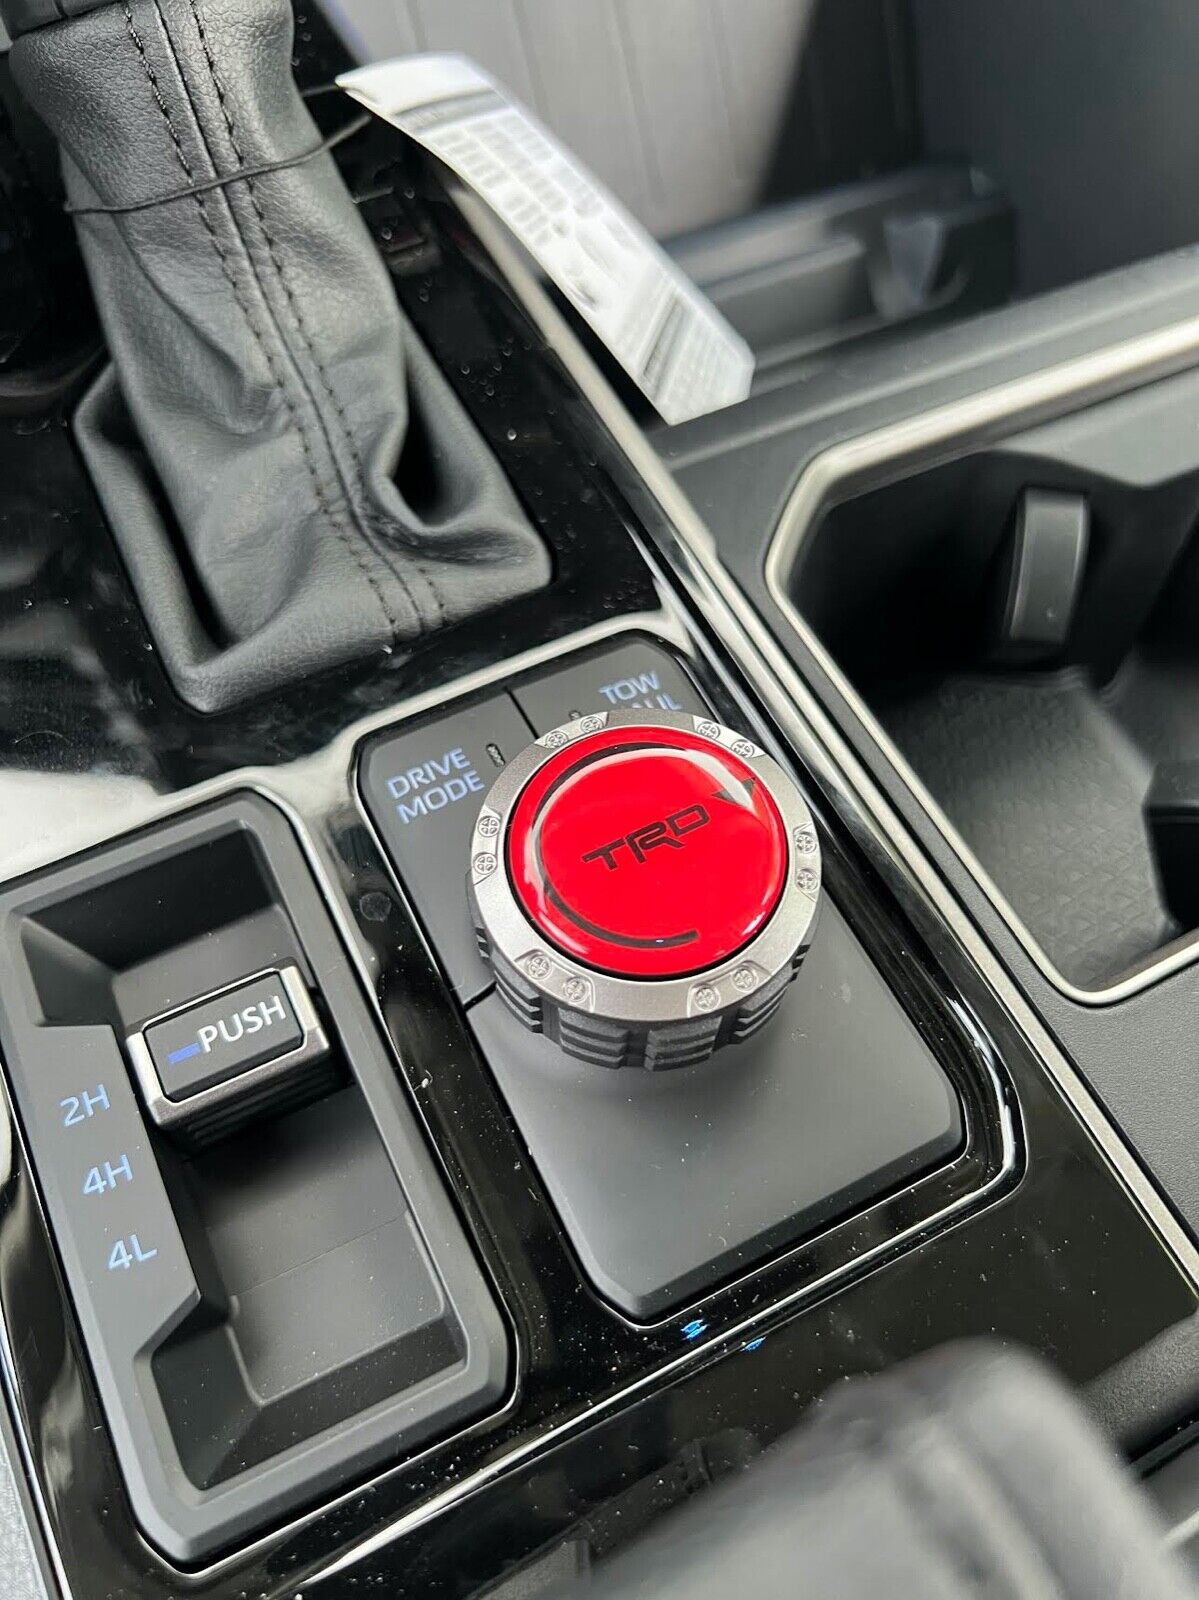 Toyota Tundra 2022 ECO NORMAL SPORT DRIVE MODE RED BUTTON 3D OVERLAY DECAL DOMED